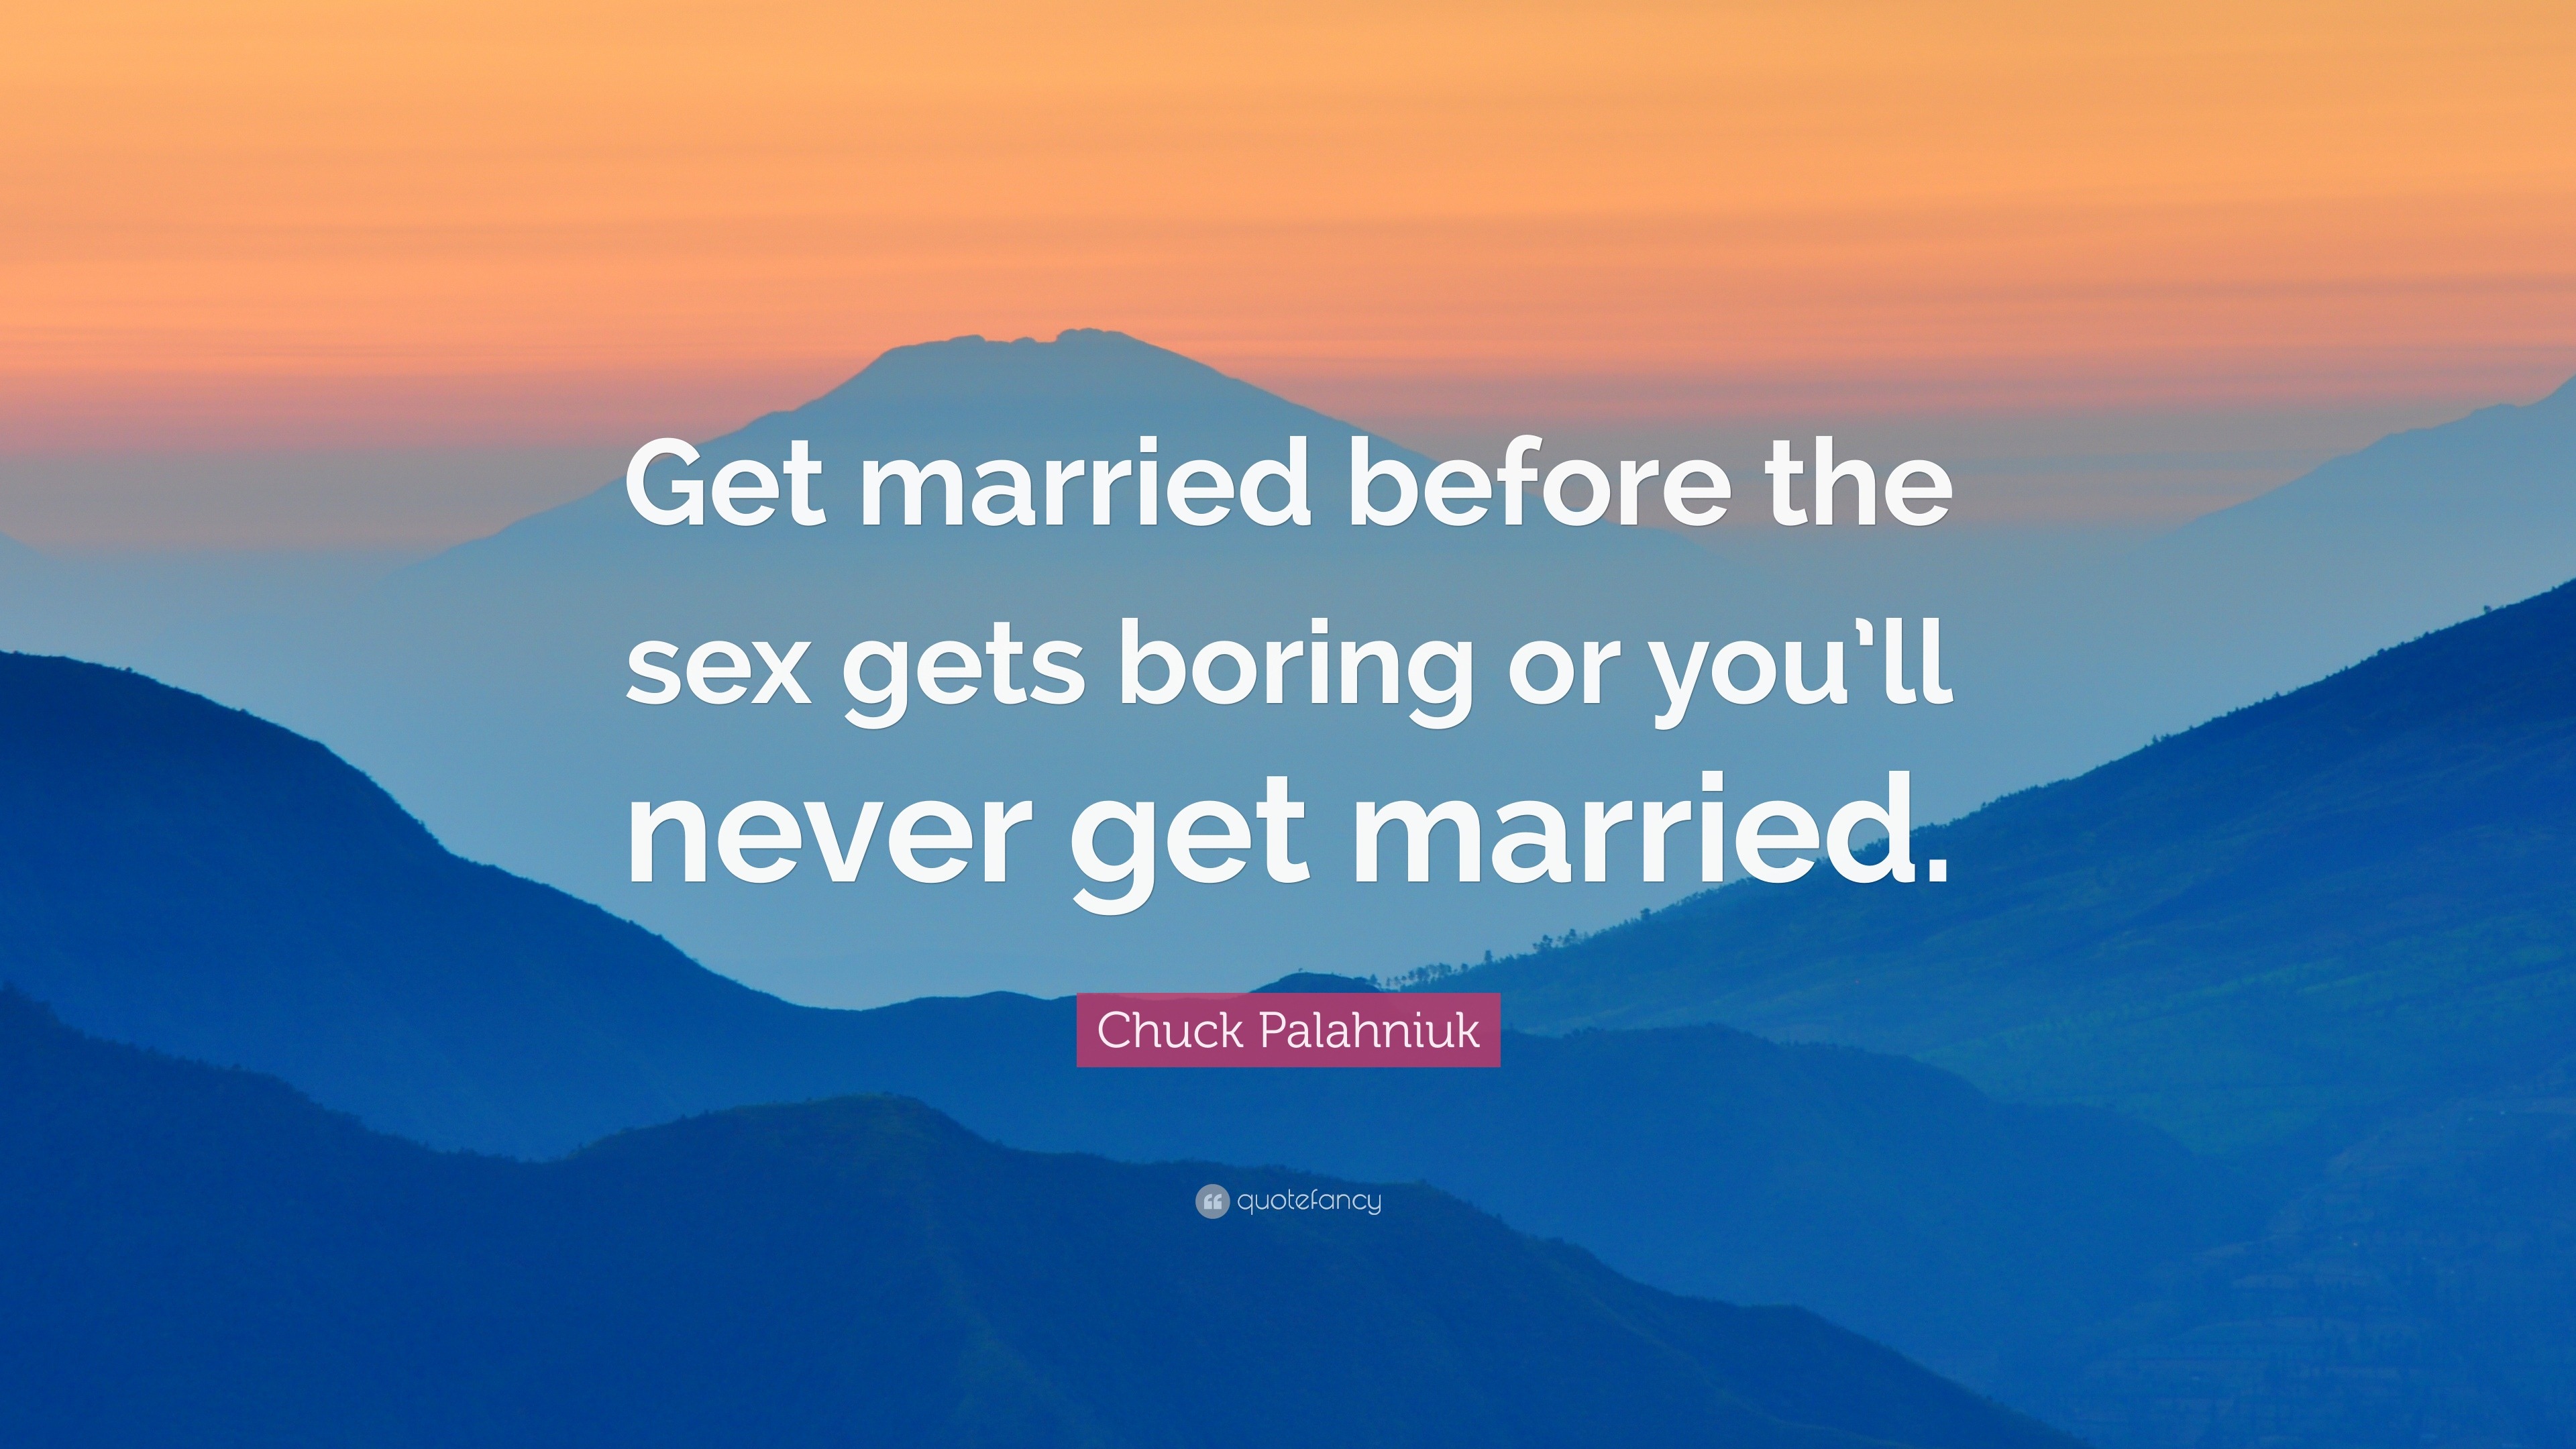 Chuck Palahniuk Quote “Get married before the sex gets boring or youll never get married.” photo